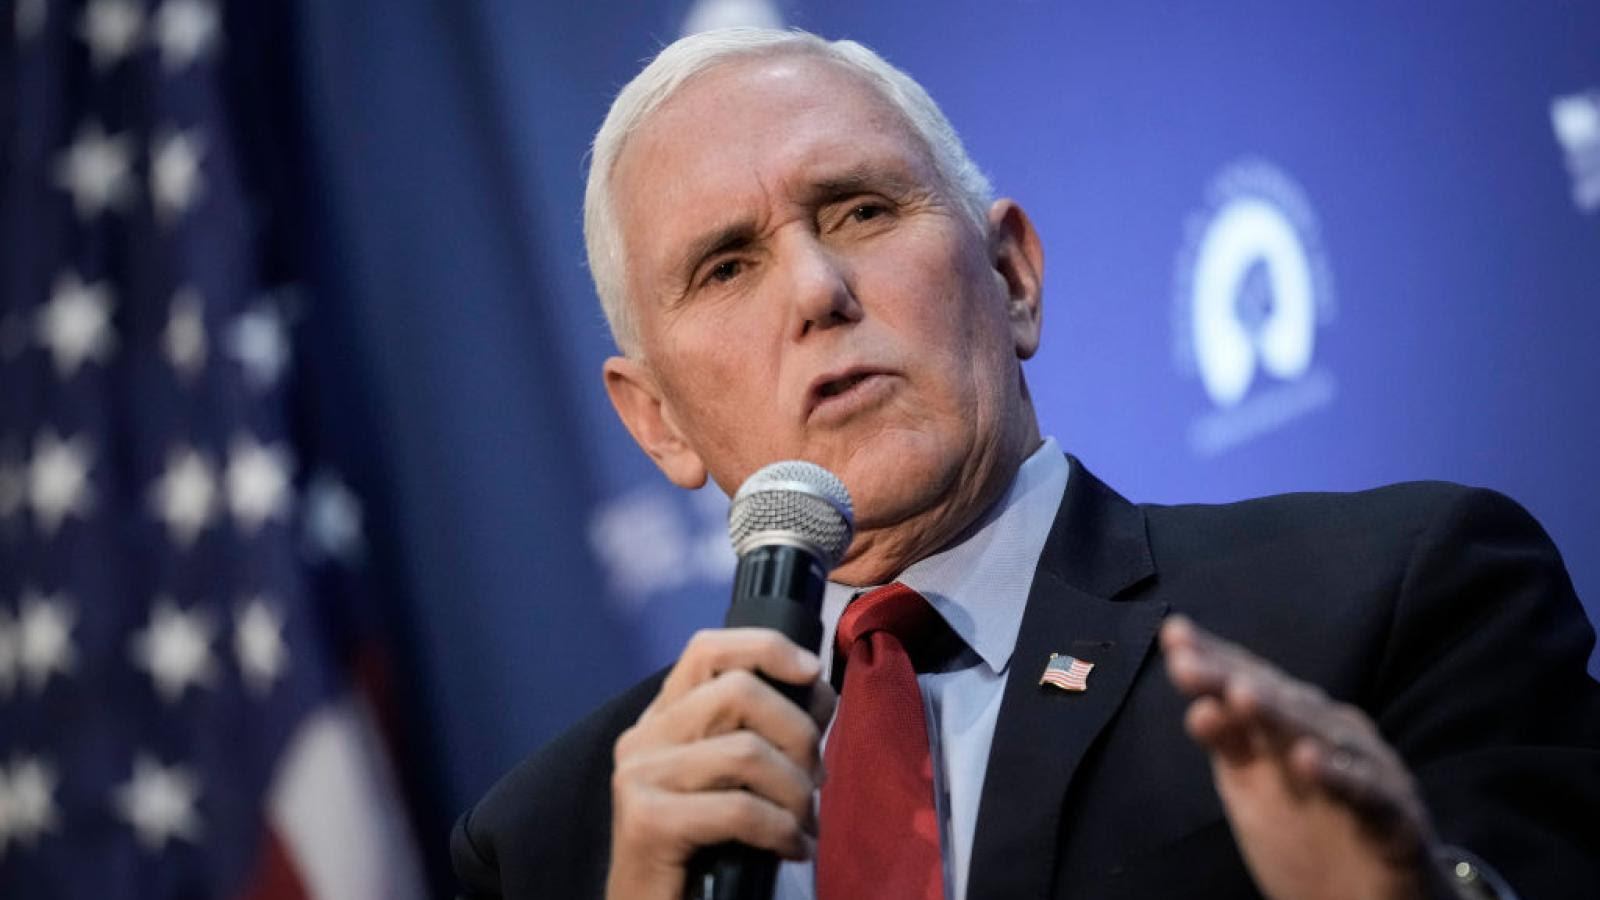 Feds find another classified document at Pence home following search  GettyImages-1236914597